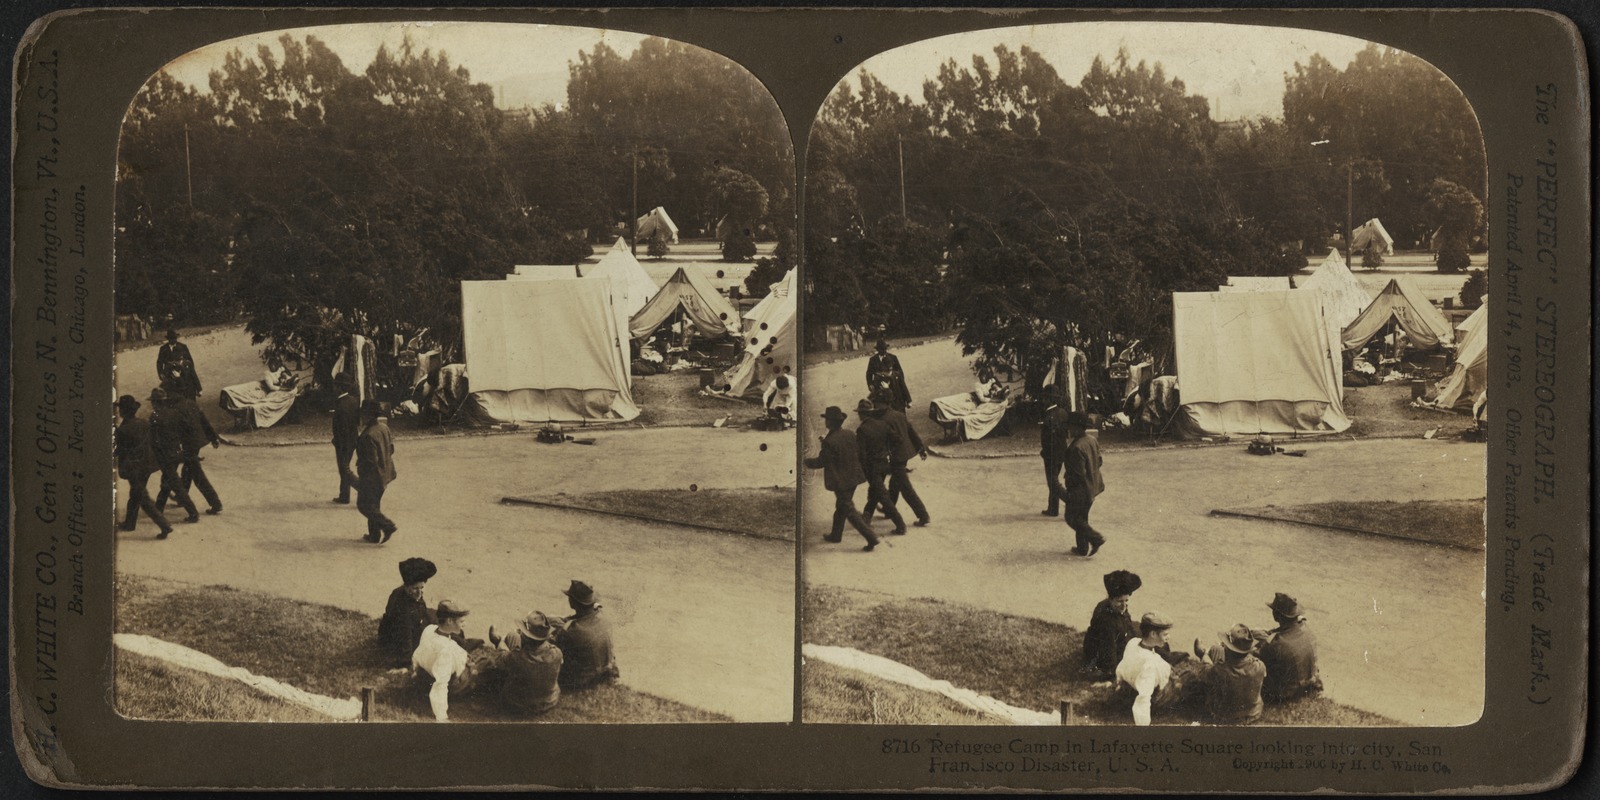 Refugee camp in Lafayette Square looking into the city, San Francisco disaster, U.S.A.